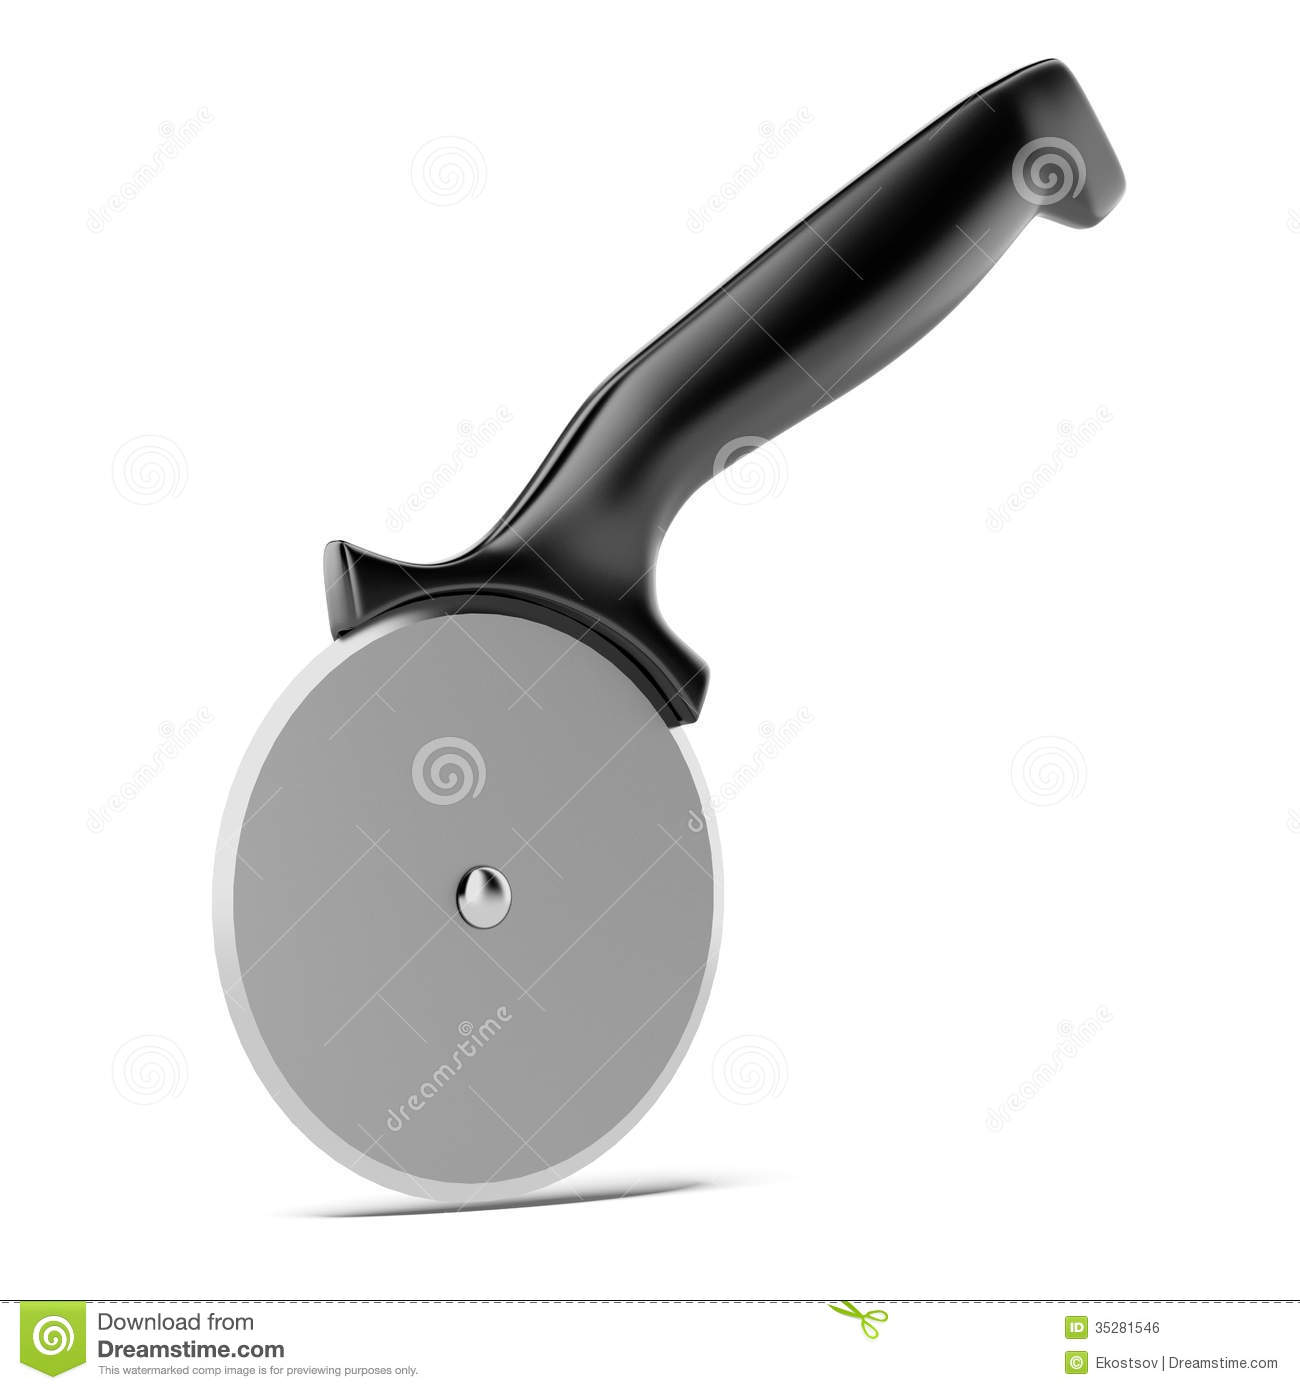 Pizza Cutter Royalty Free Stock Image   Image  35281546